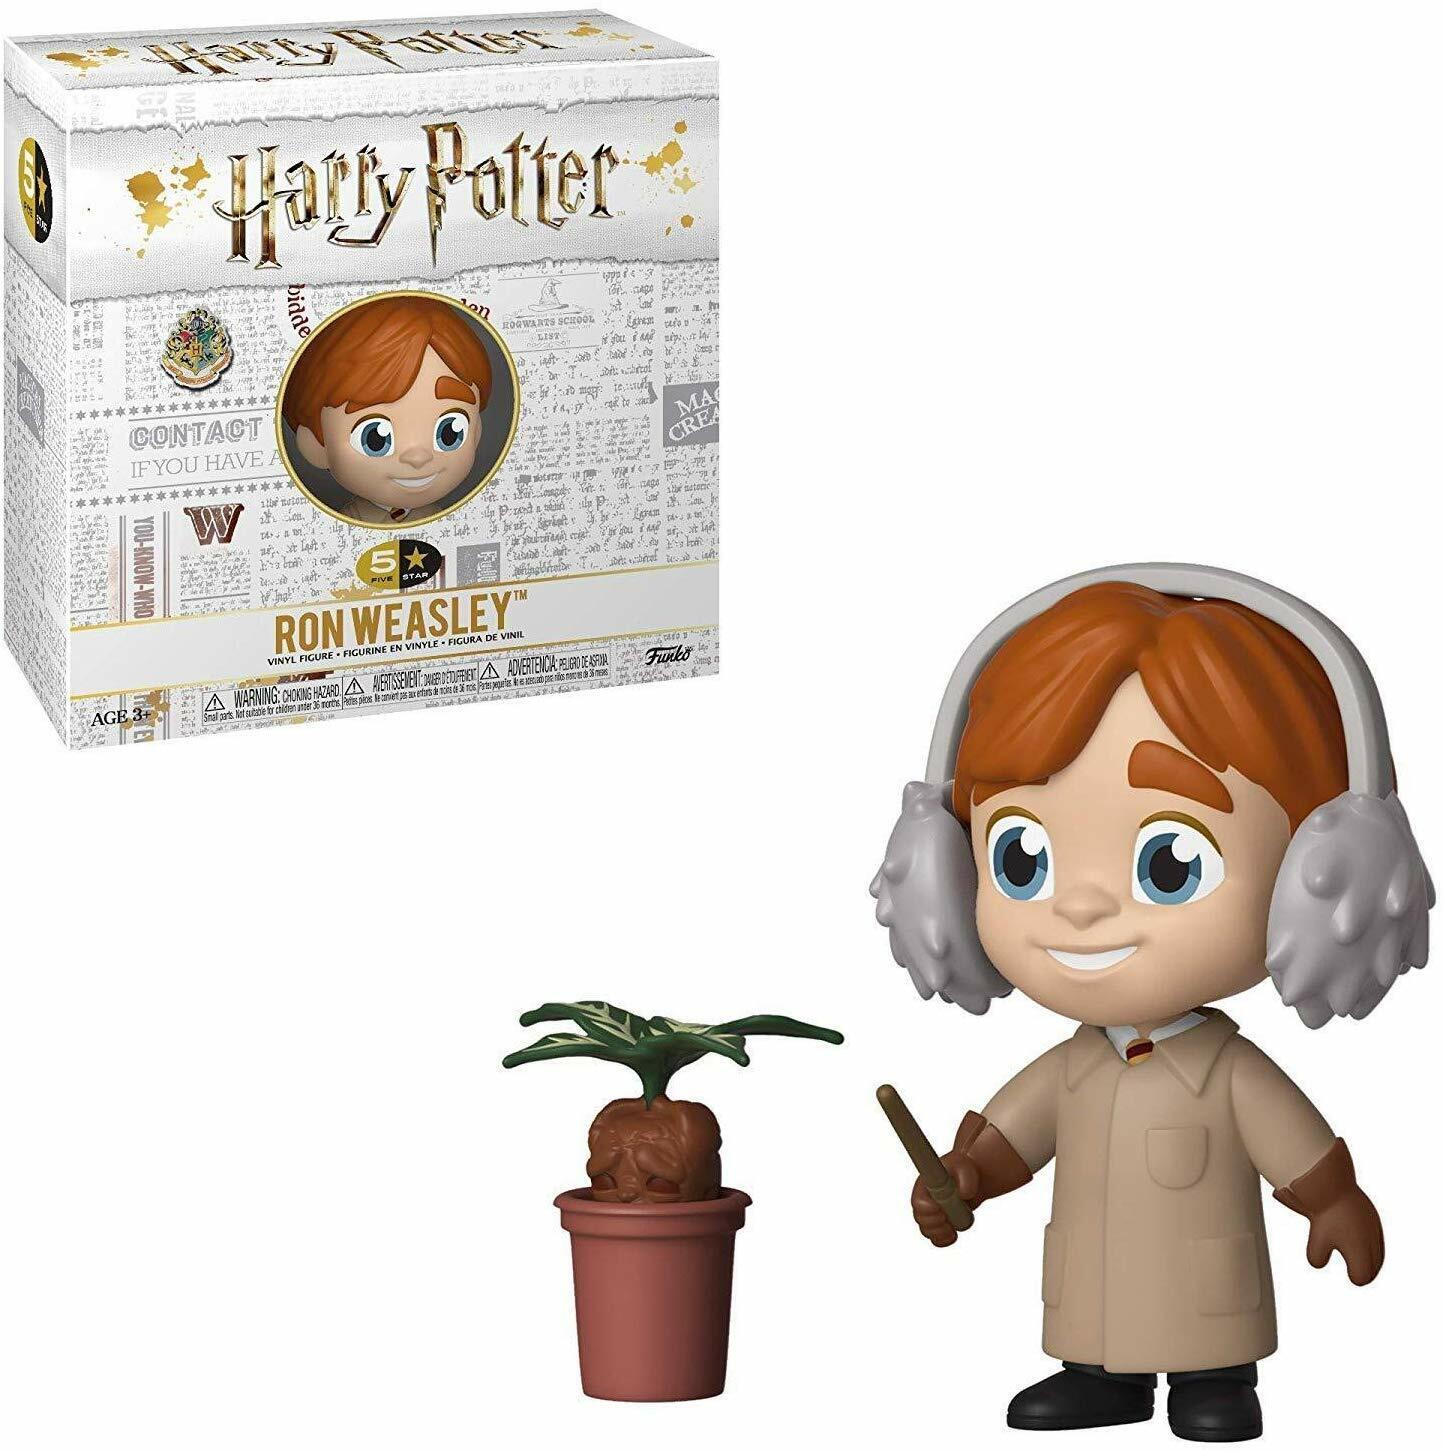 Funko 5 Star: Harry Potter - Ron Weasly (Herbology)